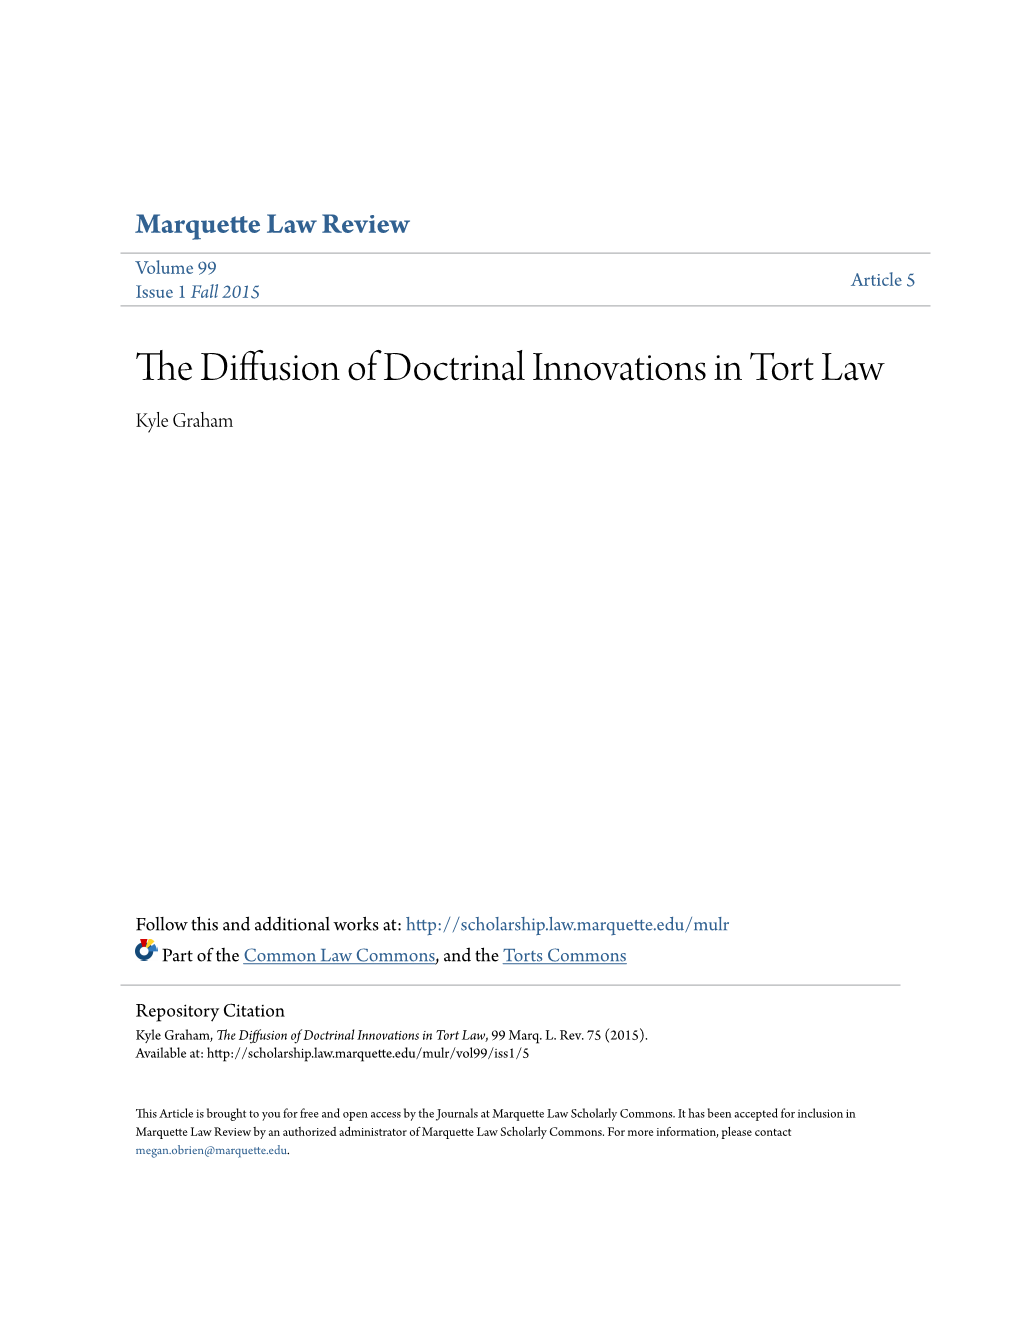 The Diffusion of Doctrinal Innovations in Tort Law Kyle Graham